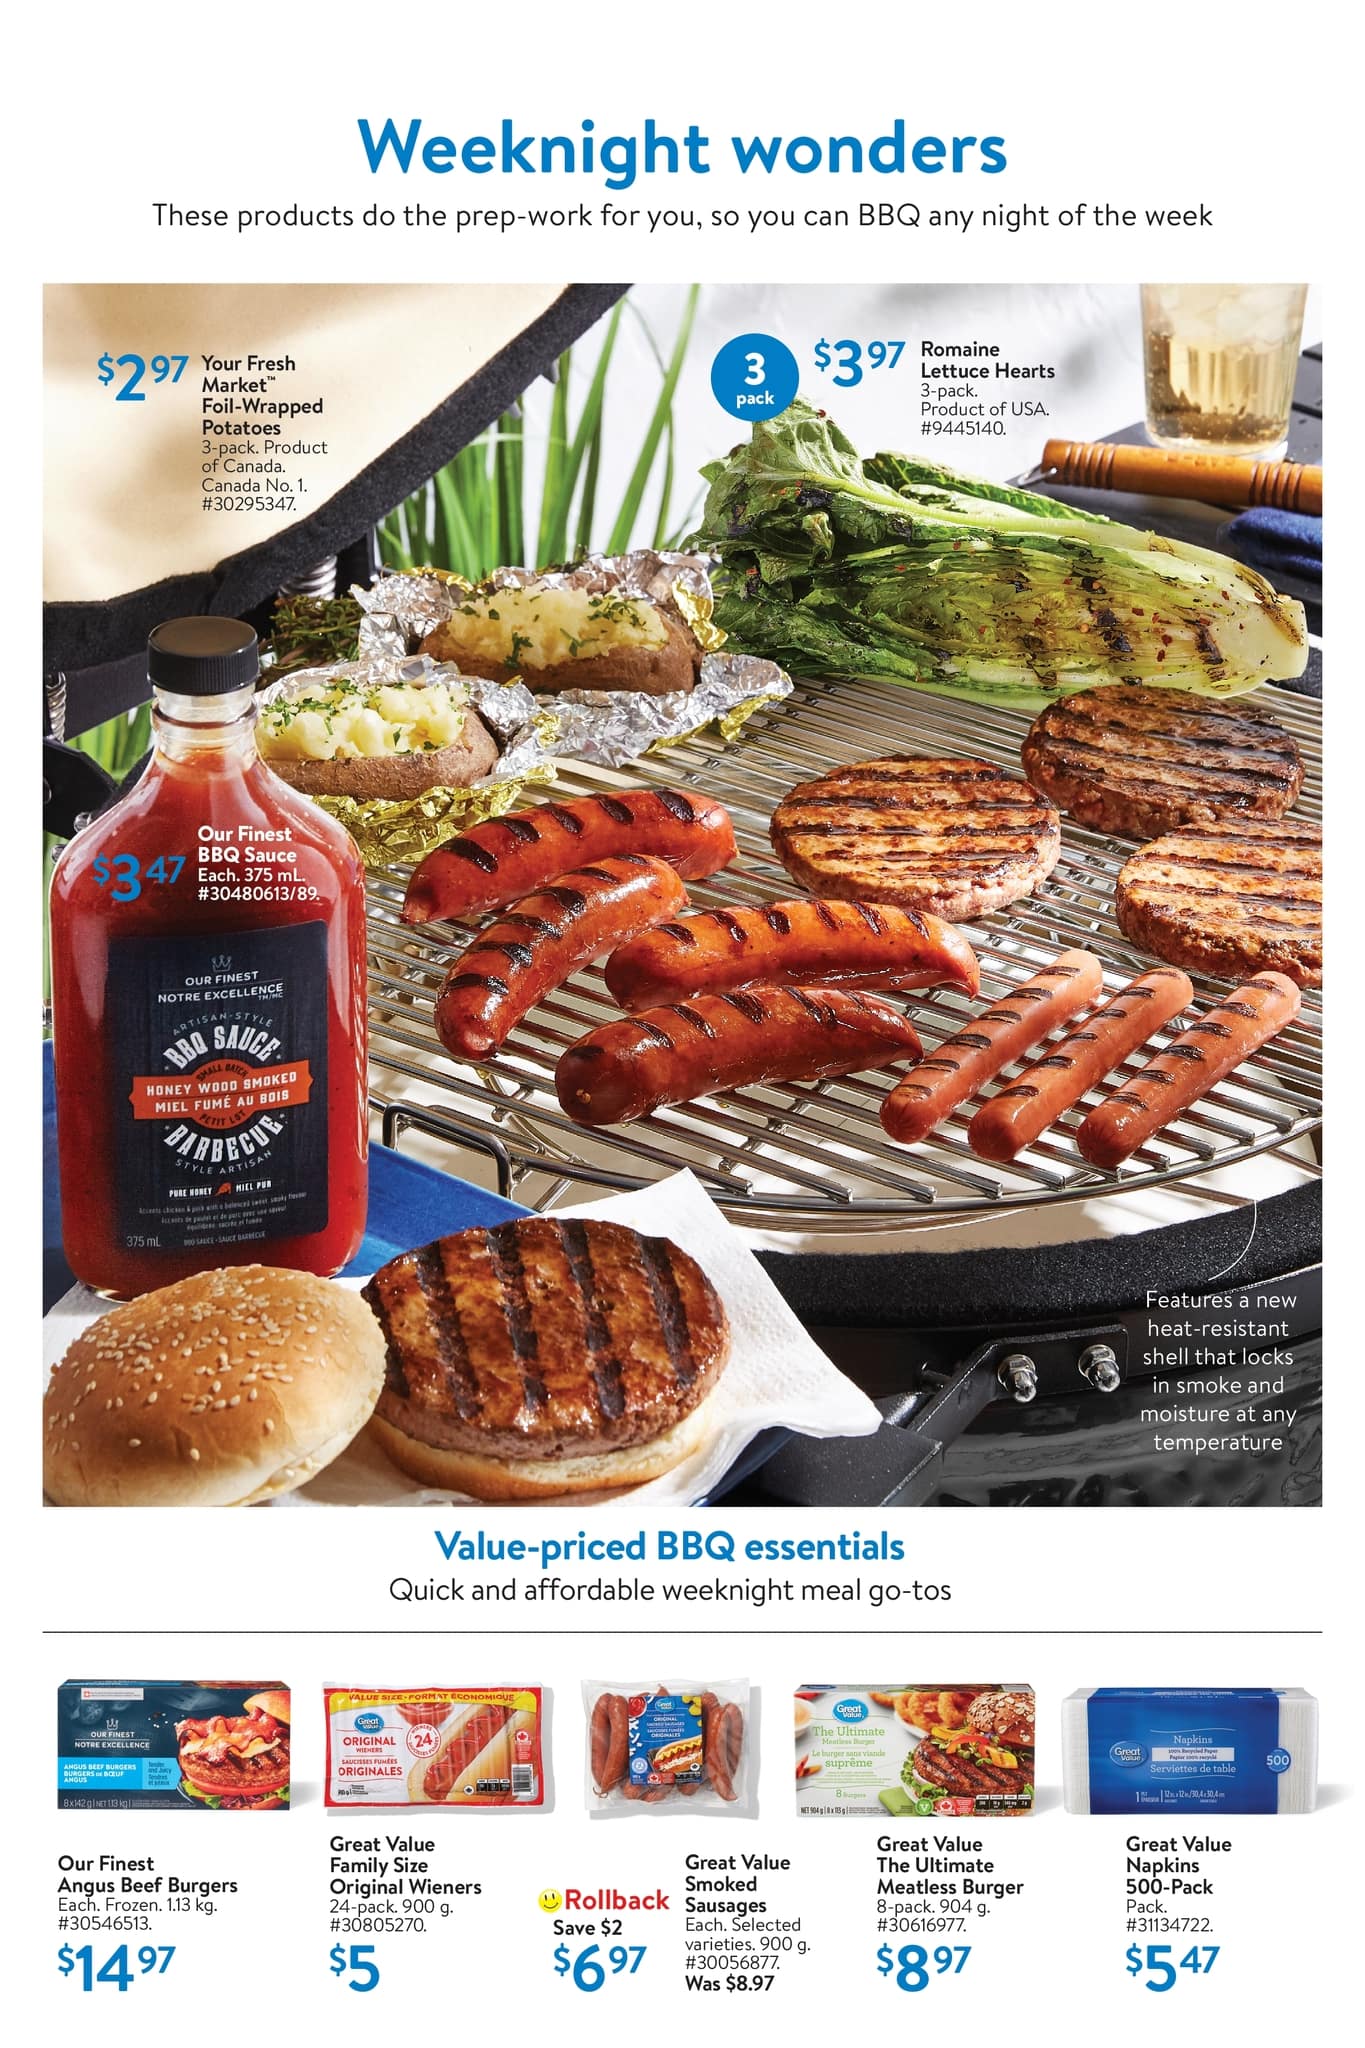 Walmart - Grilling - Page 10